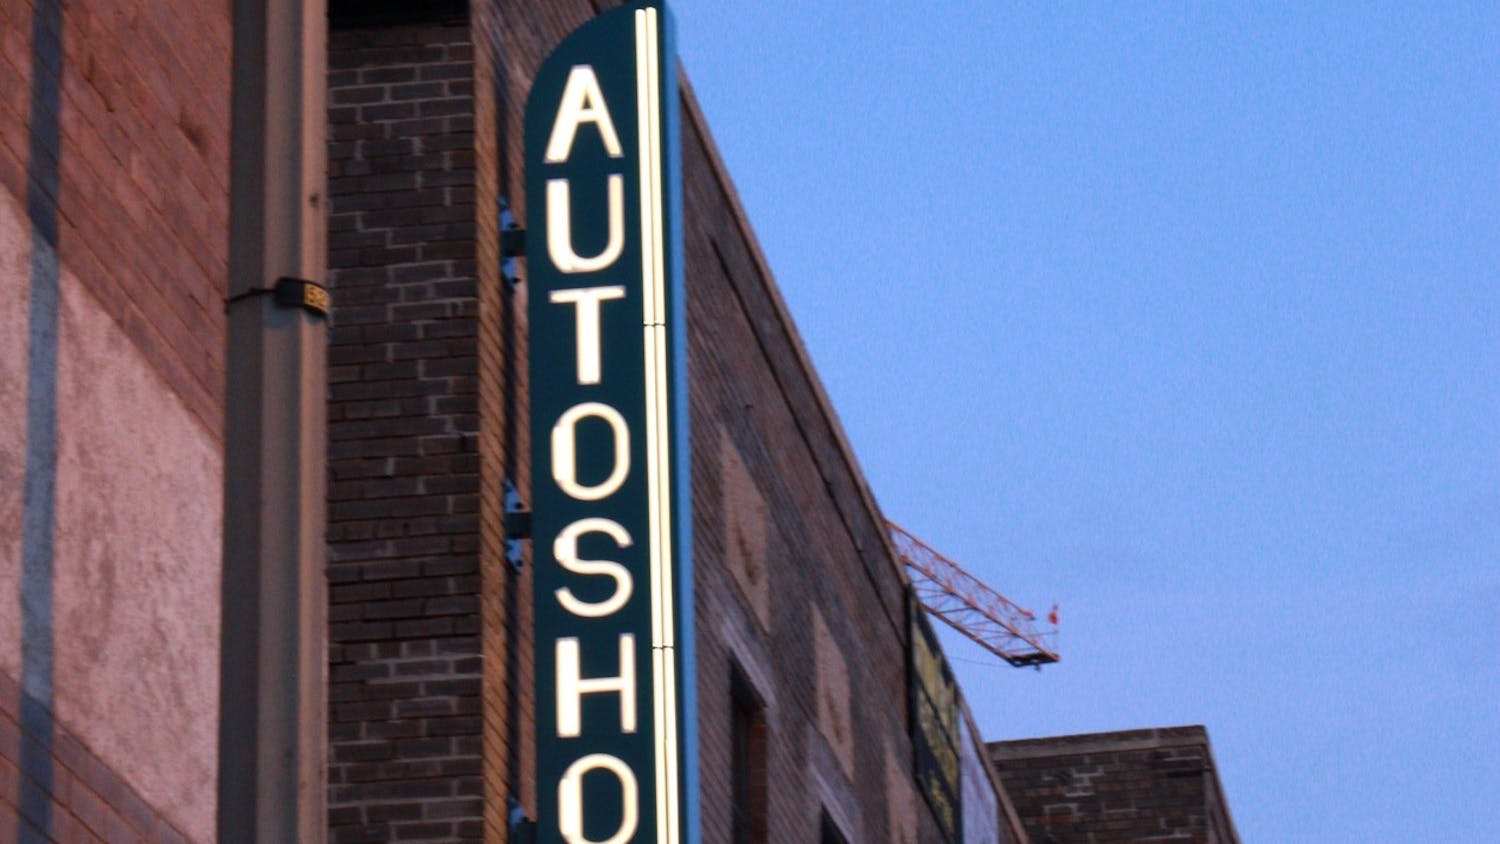 The Auto Shop Outside Sign